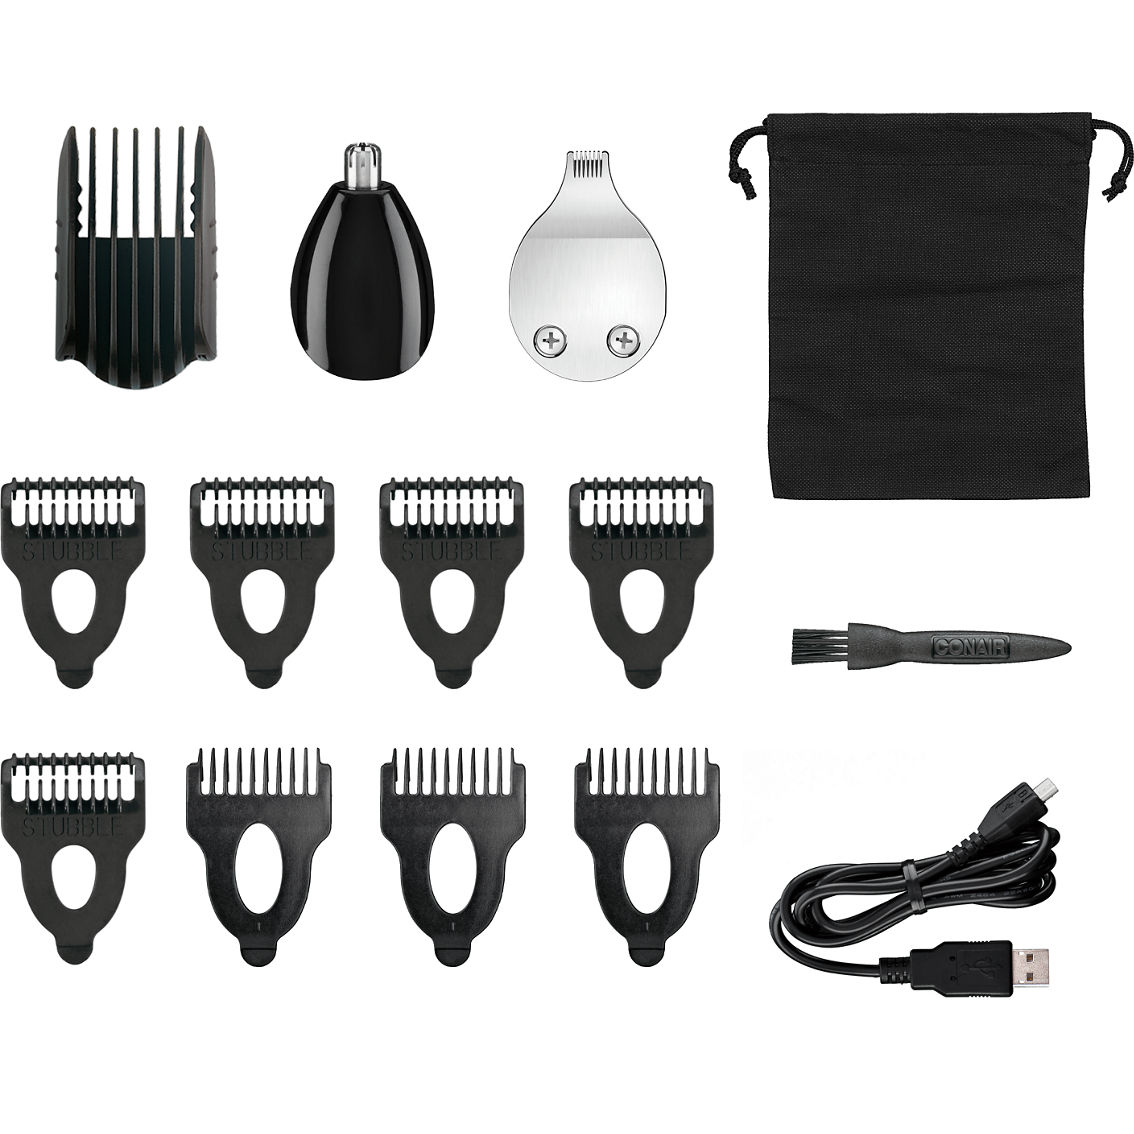 Conair Conairman Lithium Ion Powered All in One Trimmer 16 pc. - Image 7 of 10